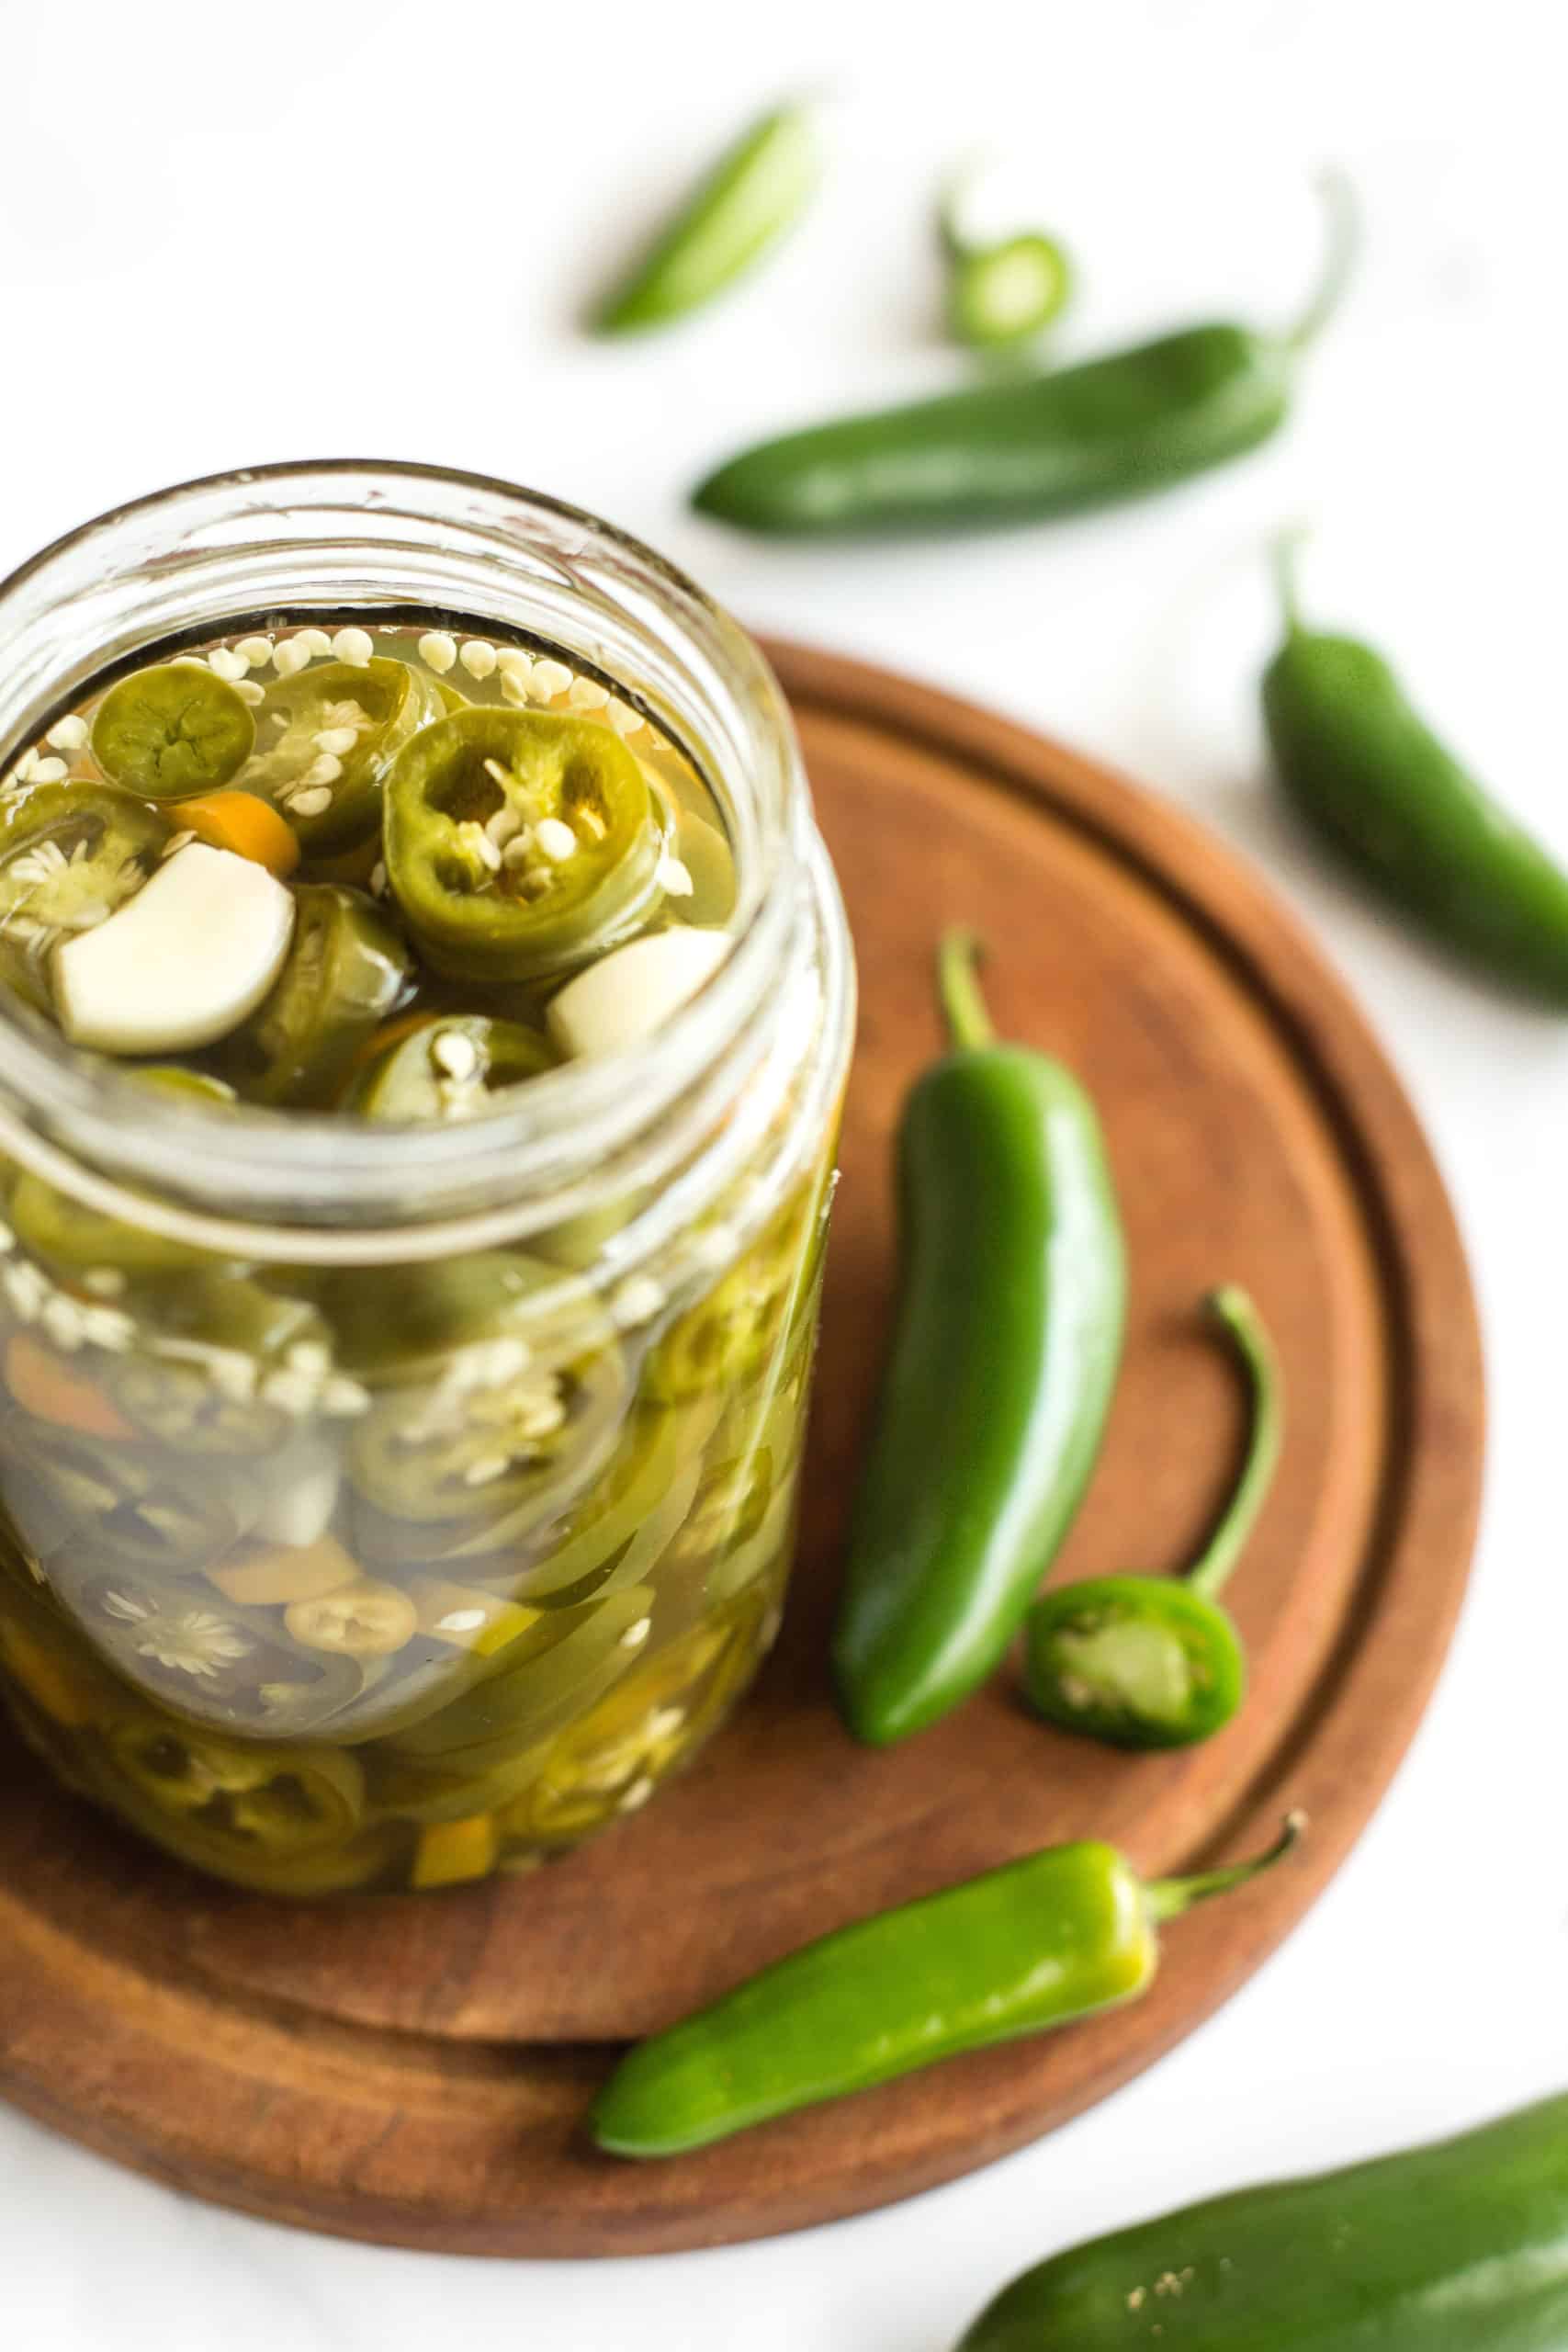 A jar of pickled jalapeños on a wooden board.